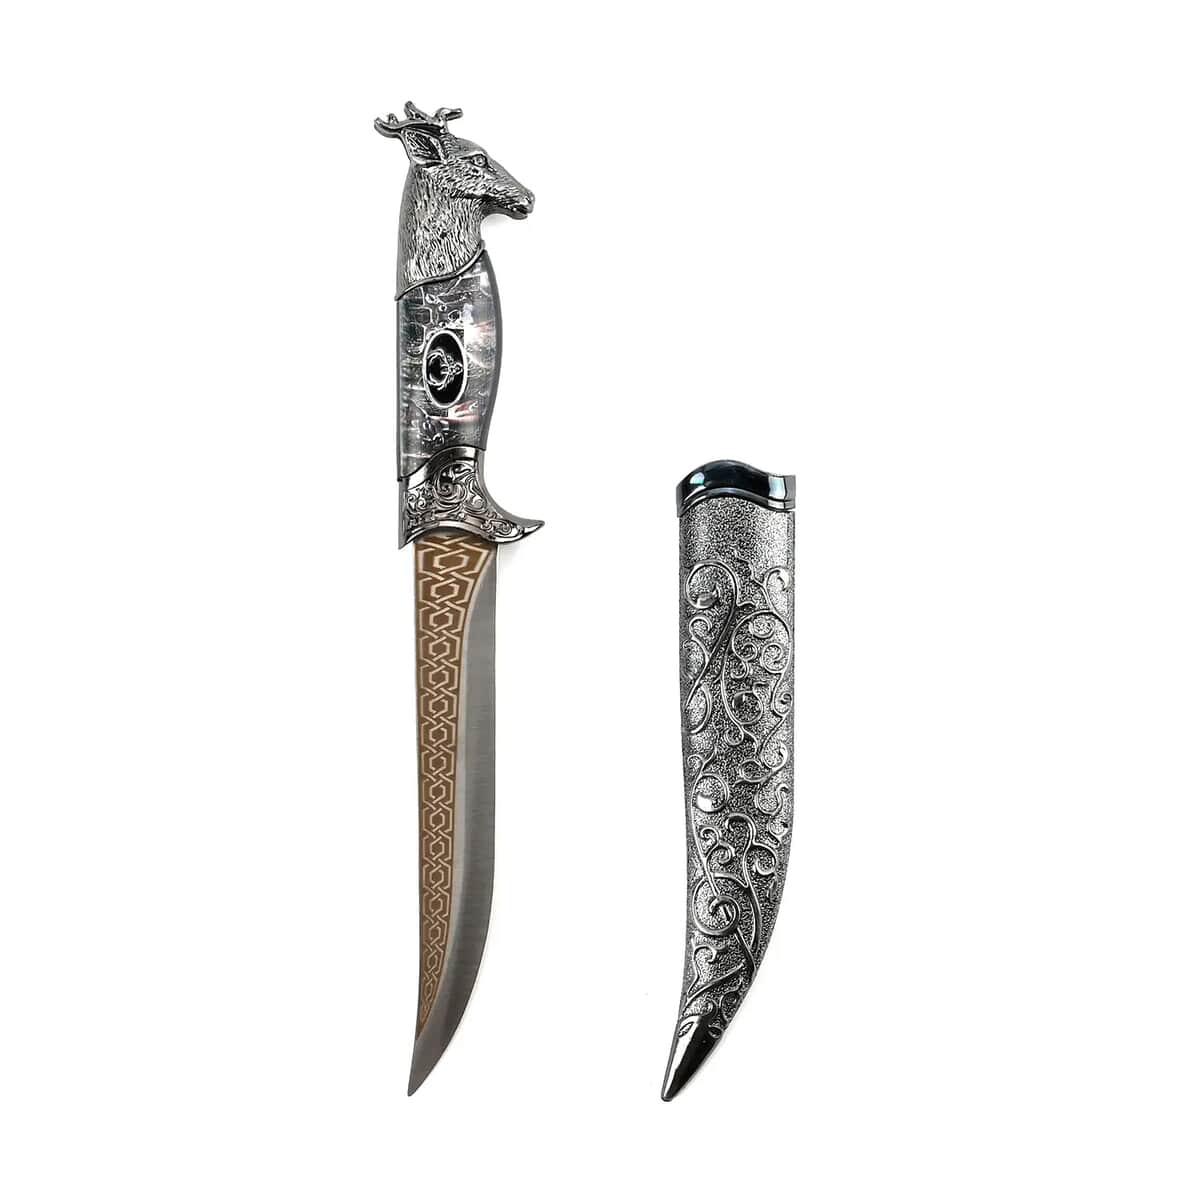 Buy Dark Silver Outdoor Hunting Knife Stainless Steel Blade 6.6 and Scabbard  Handle with Deer Head Pommel at ShopLC.